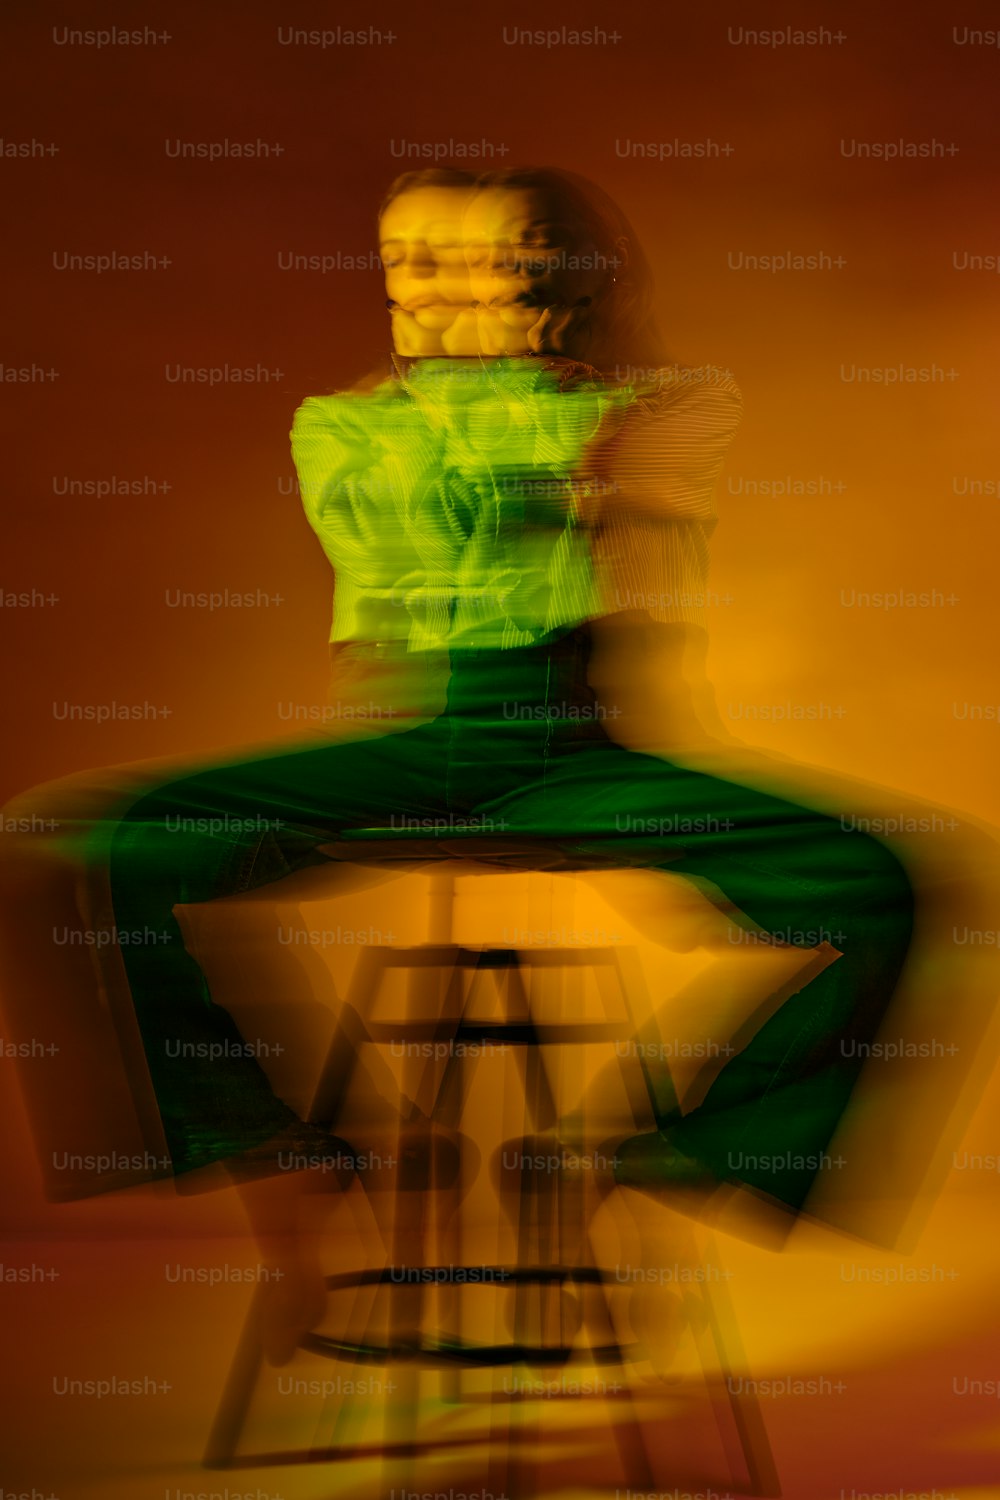 a blurry photo of a person sitting on a chair